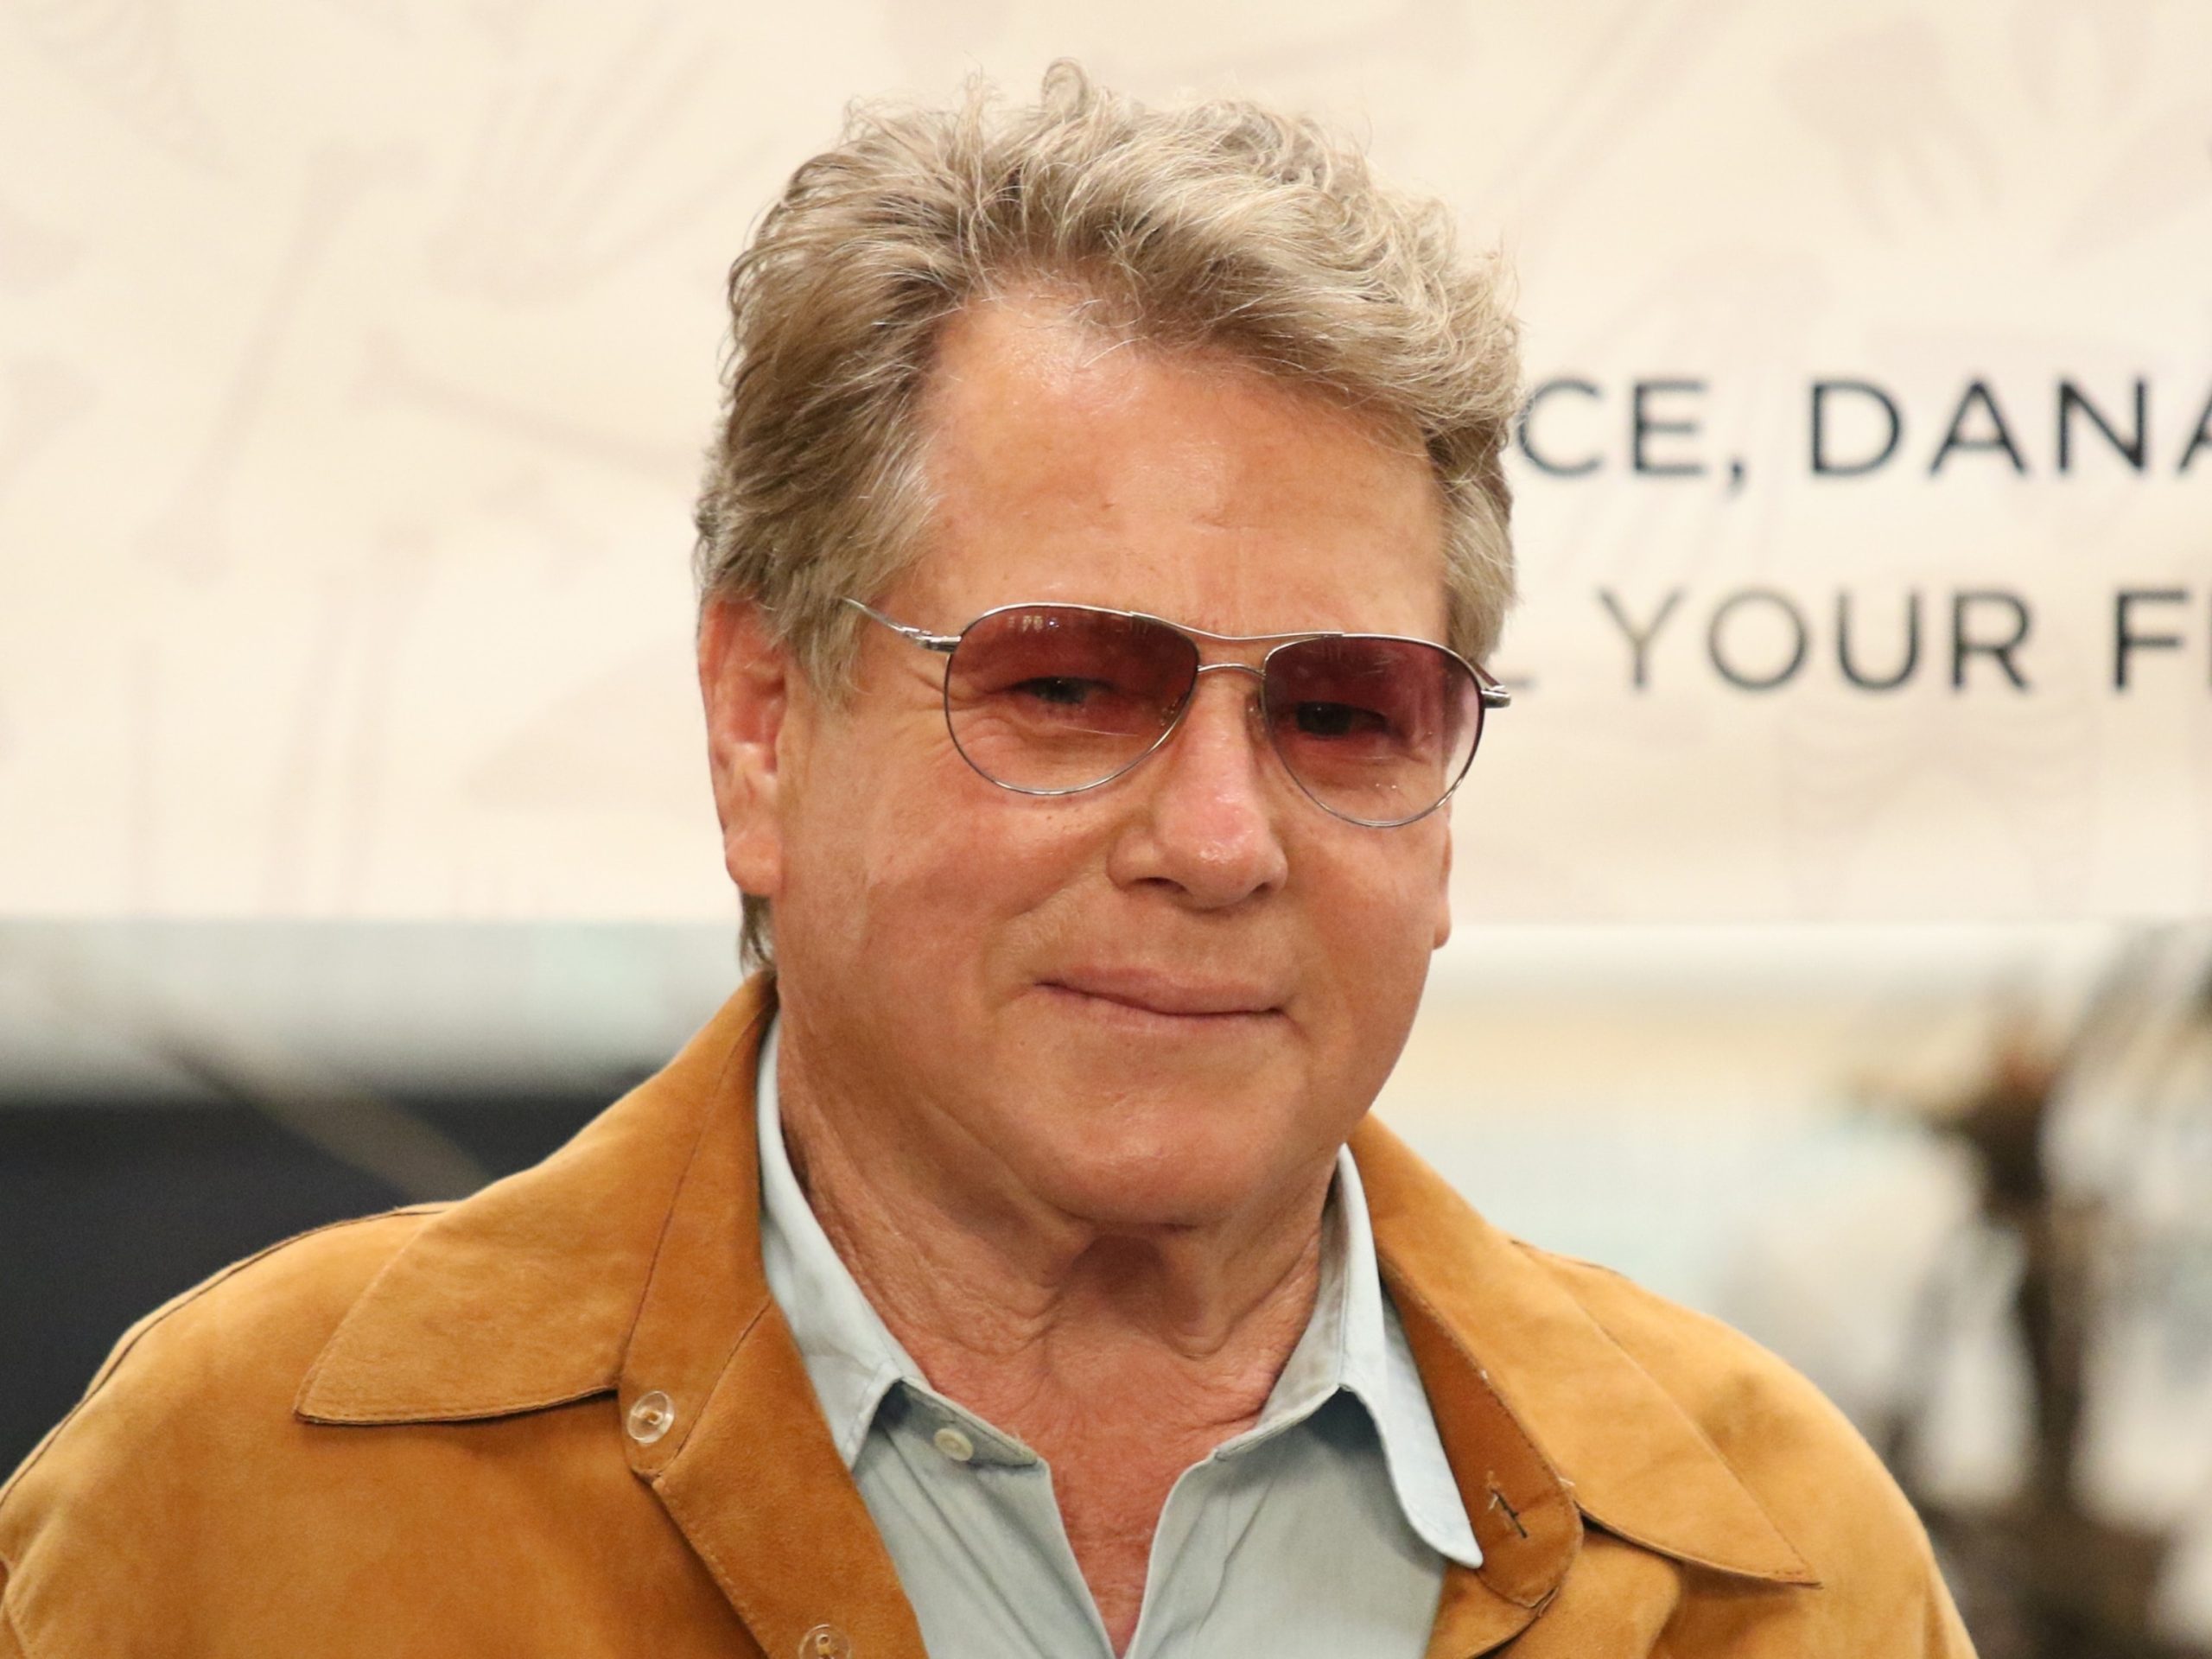 Actor Ryan O'Neal, known for his roles in 'Paper Moon' and 'Love Story', passes away at the age of 82